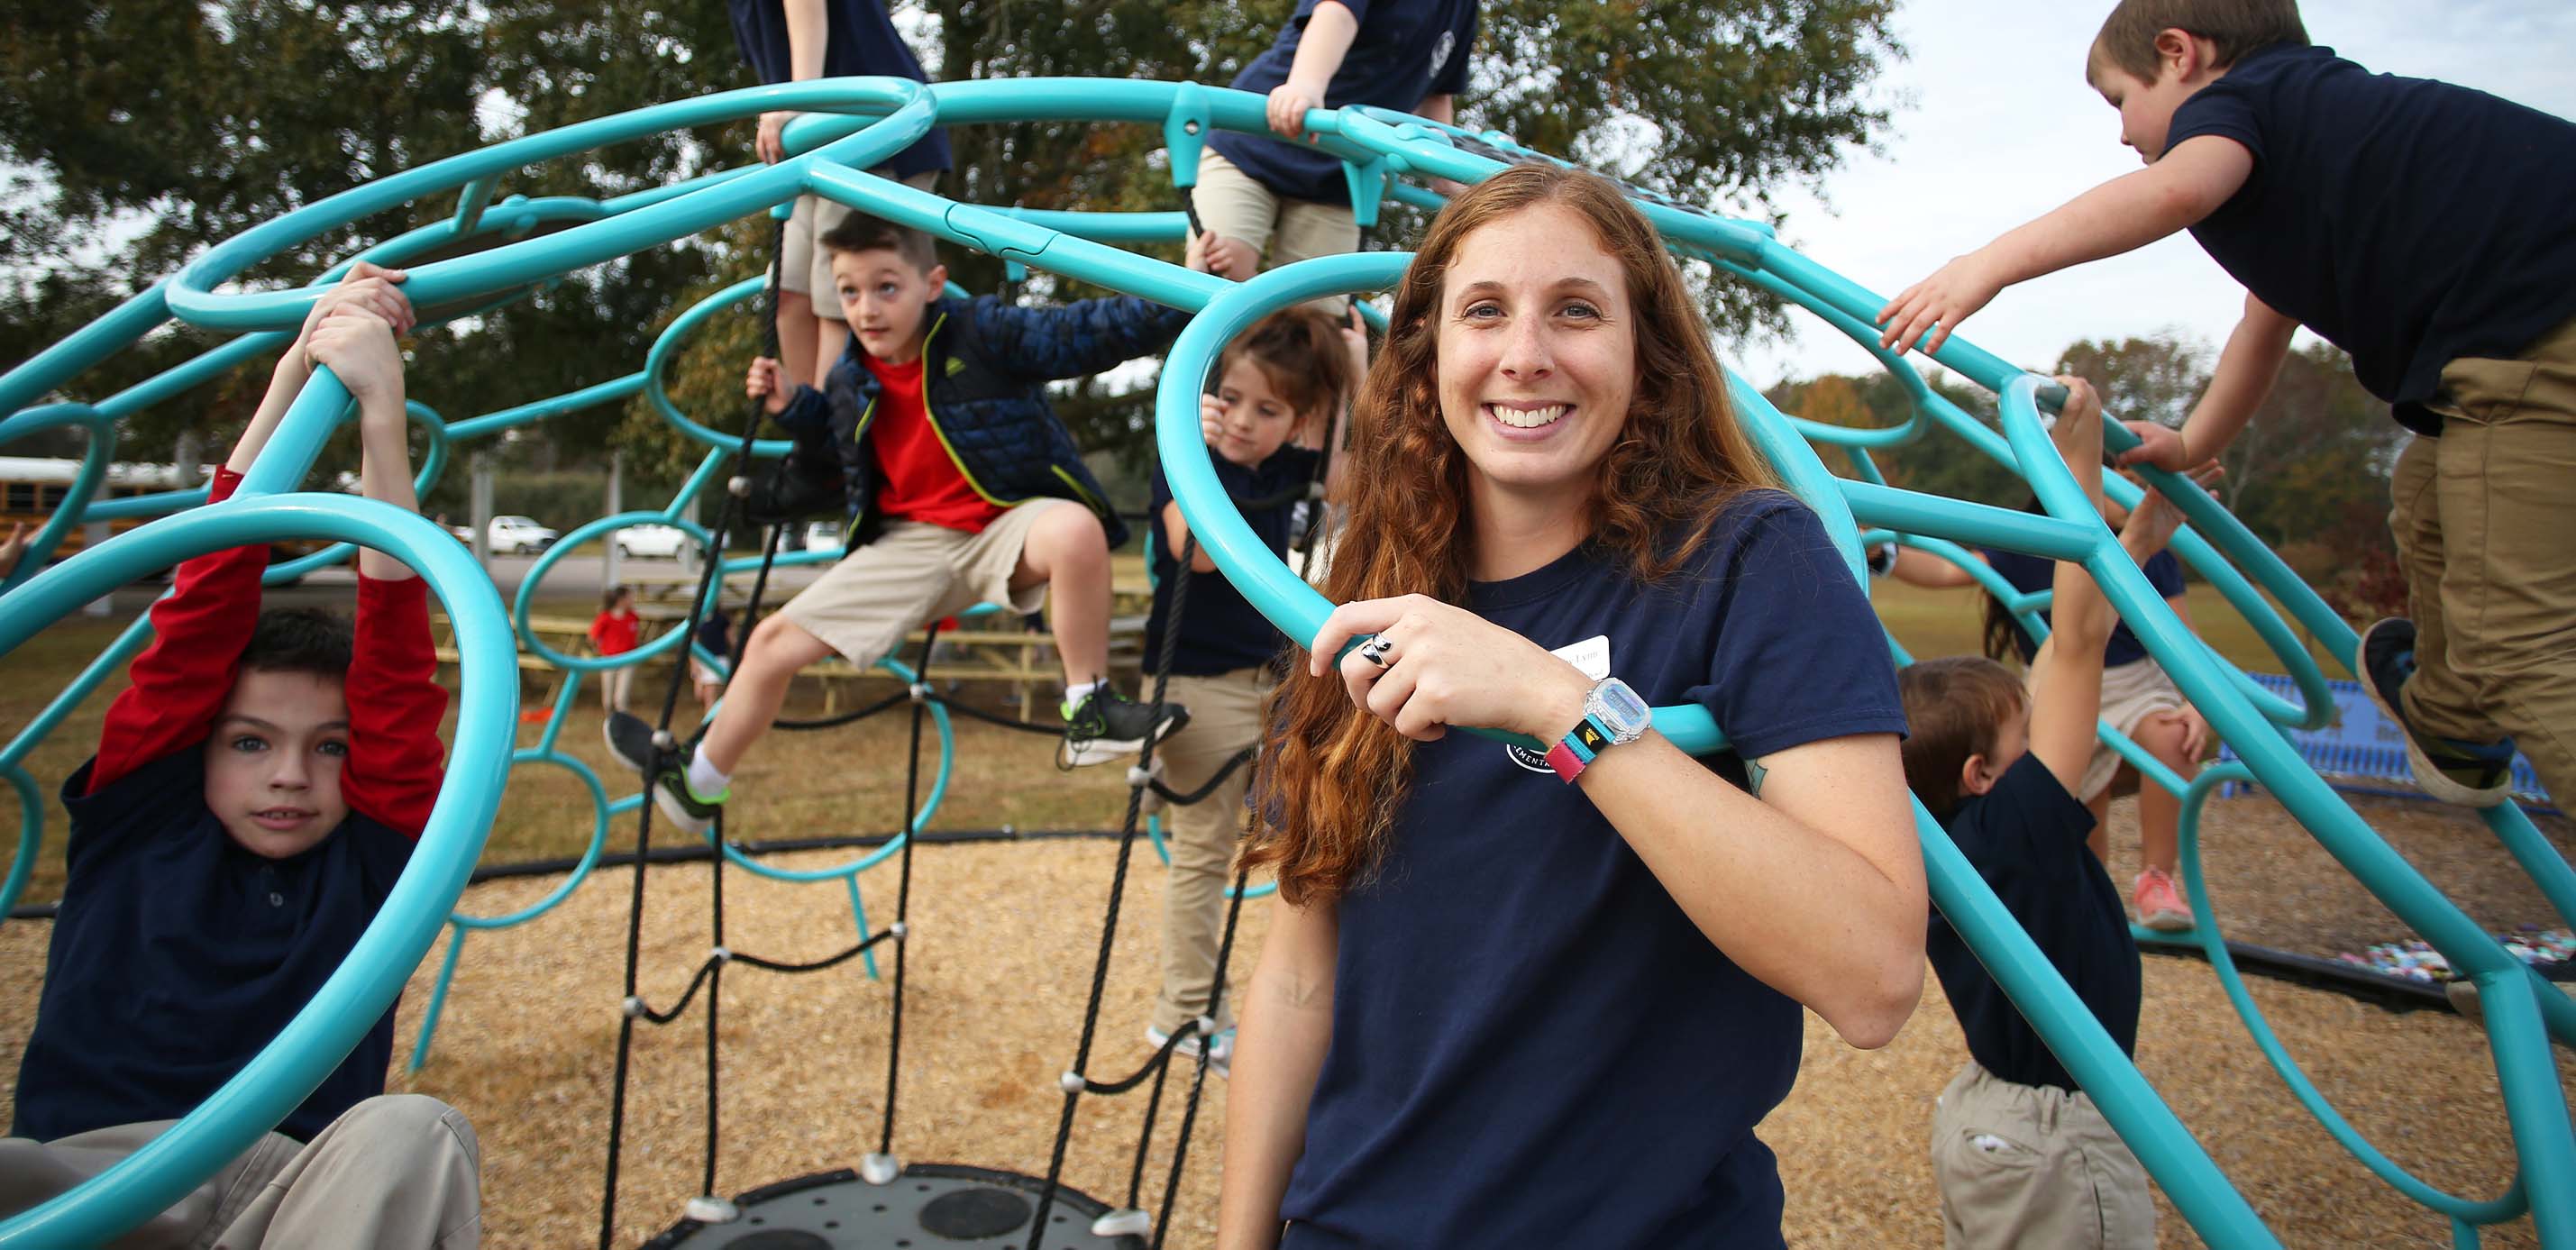 Shelby Lynn pictured with kids on playground aparatus